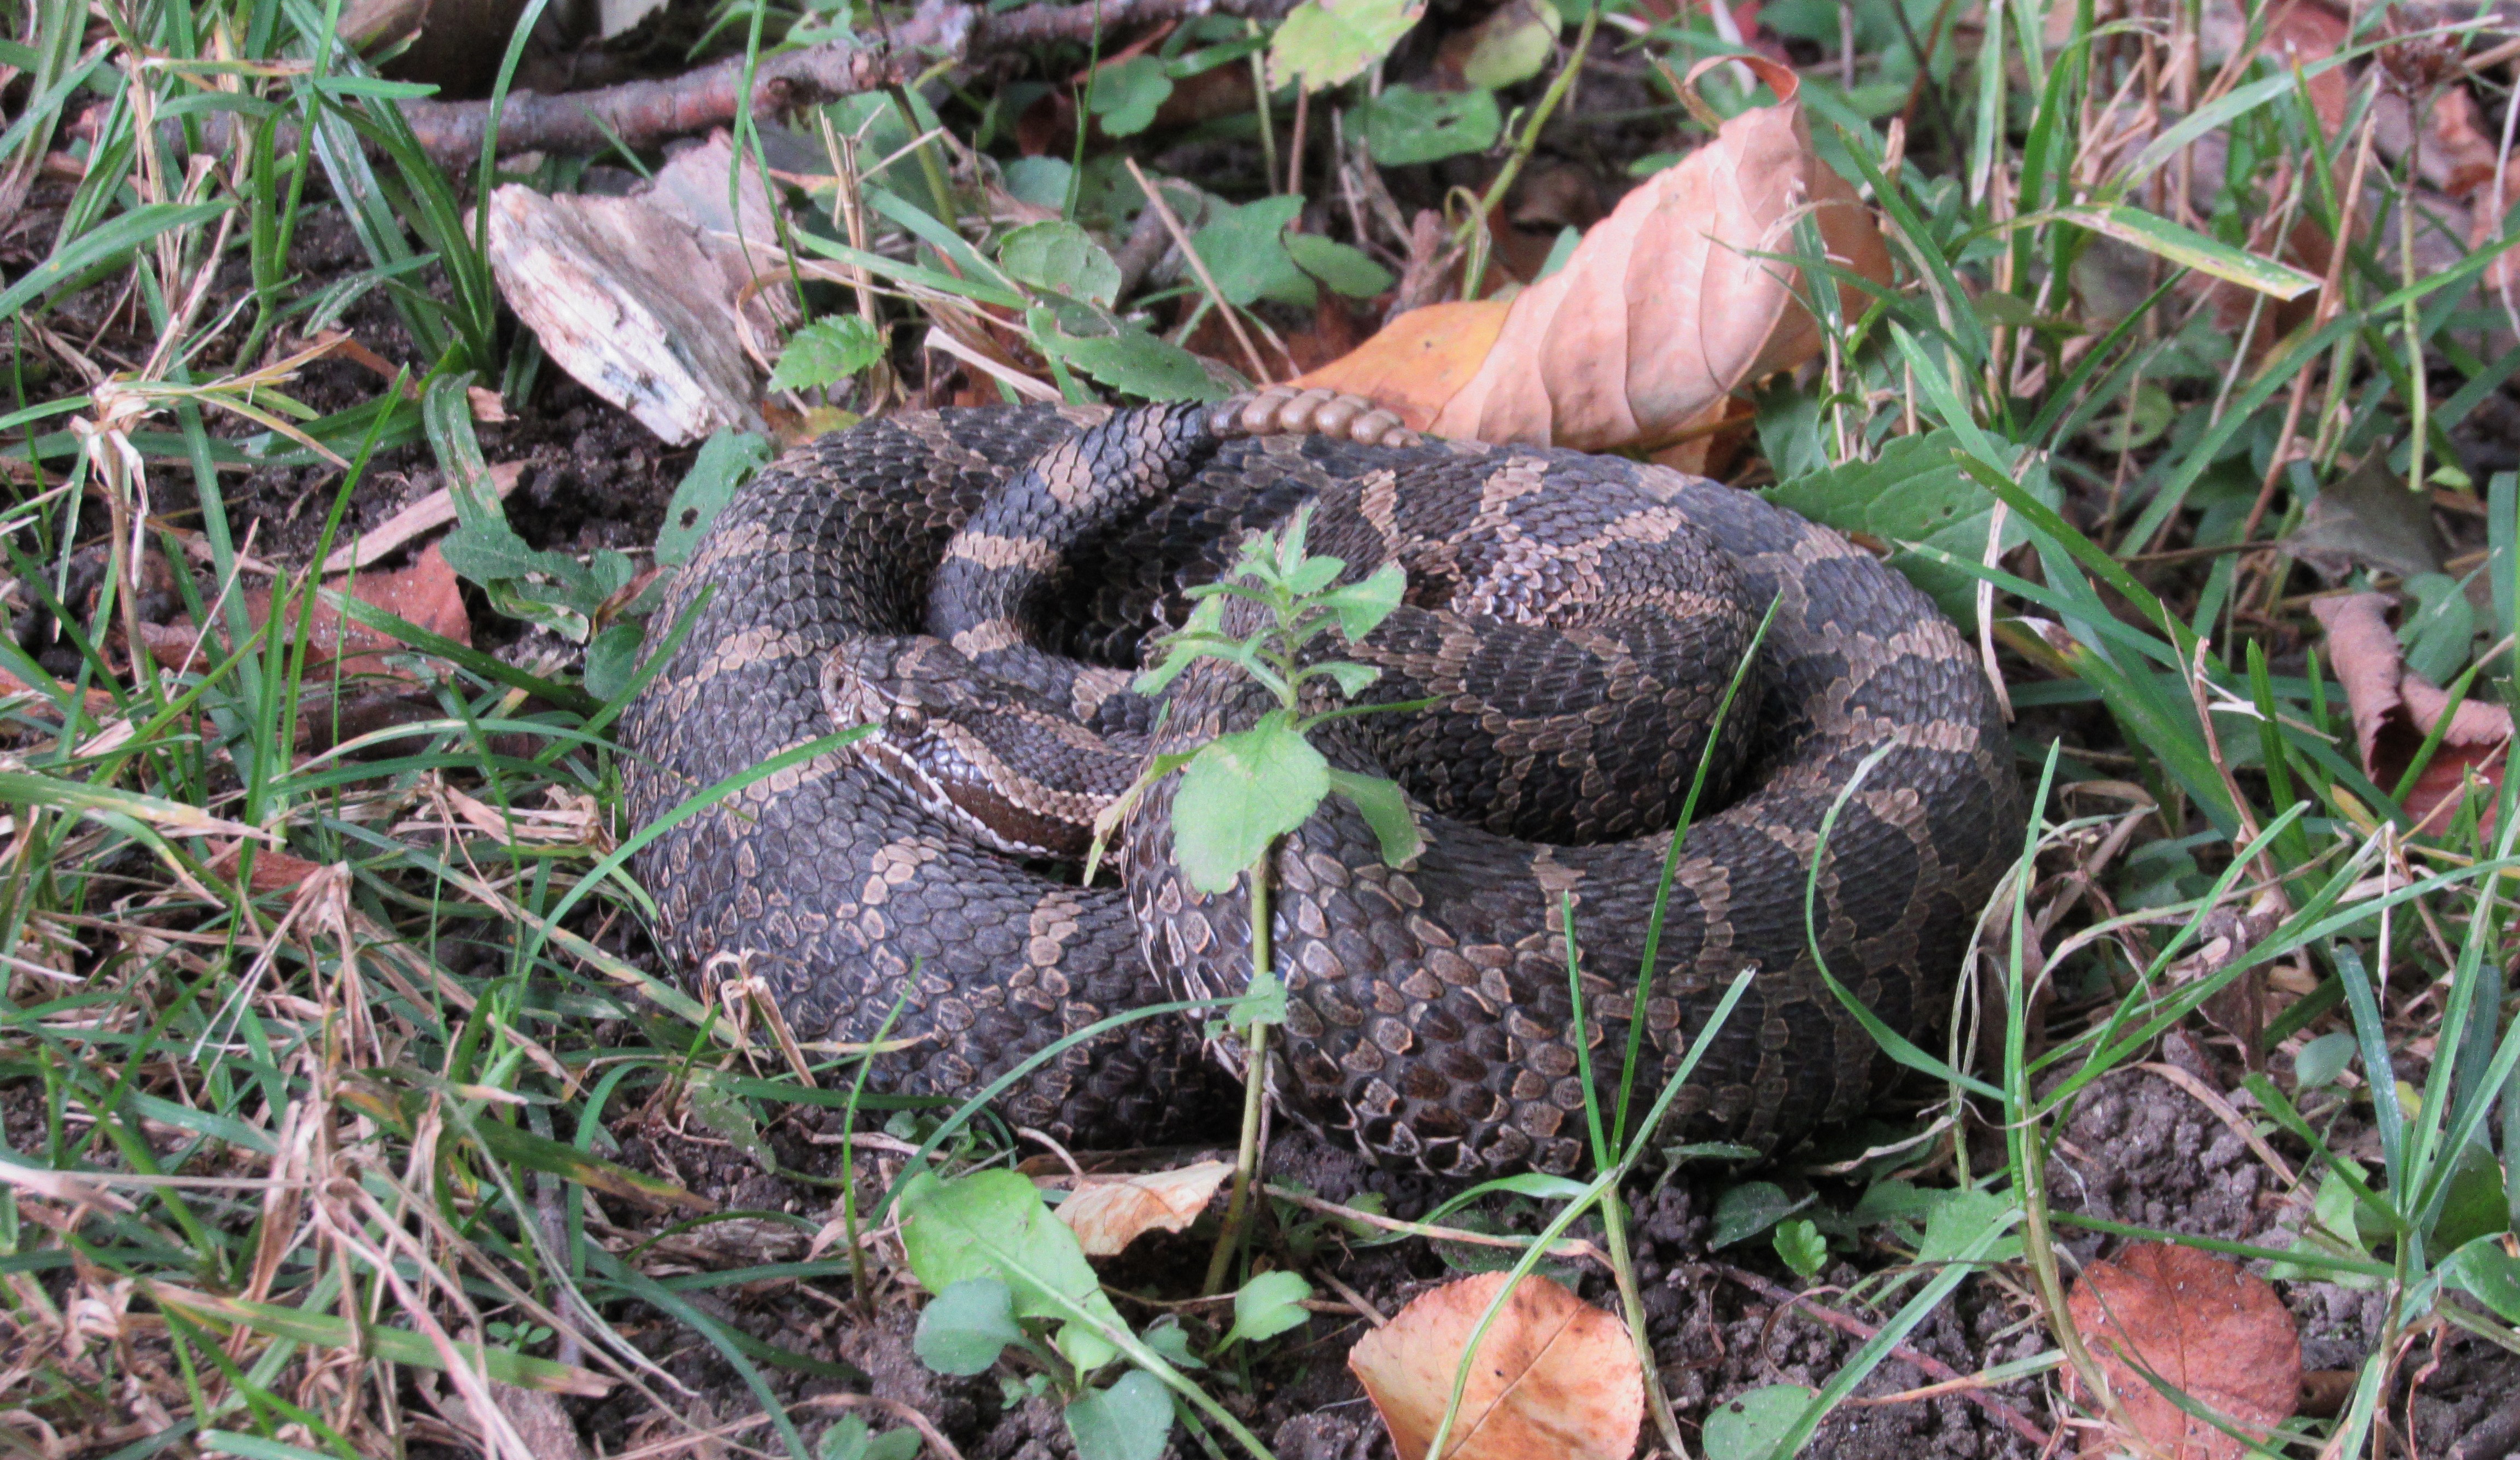 An Eastern Massasauga Rattlesnake coiled up in green grass and fallen leaves.